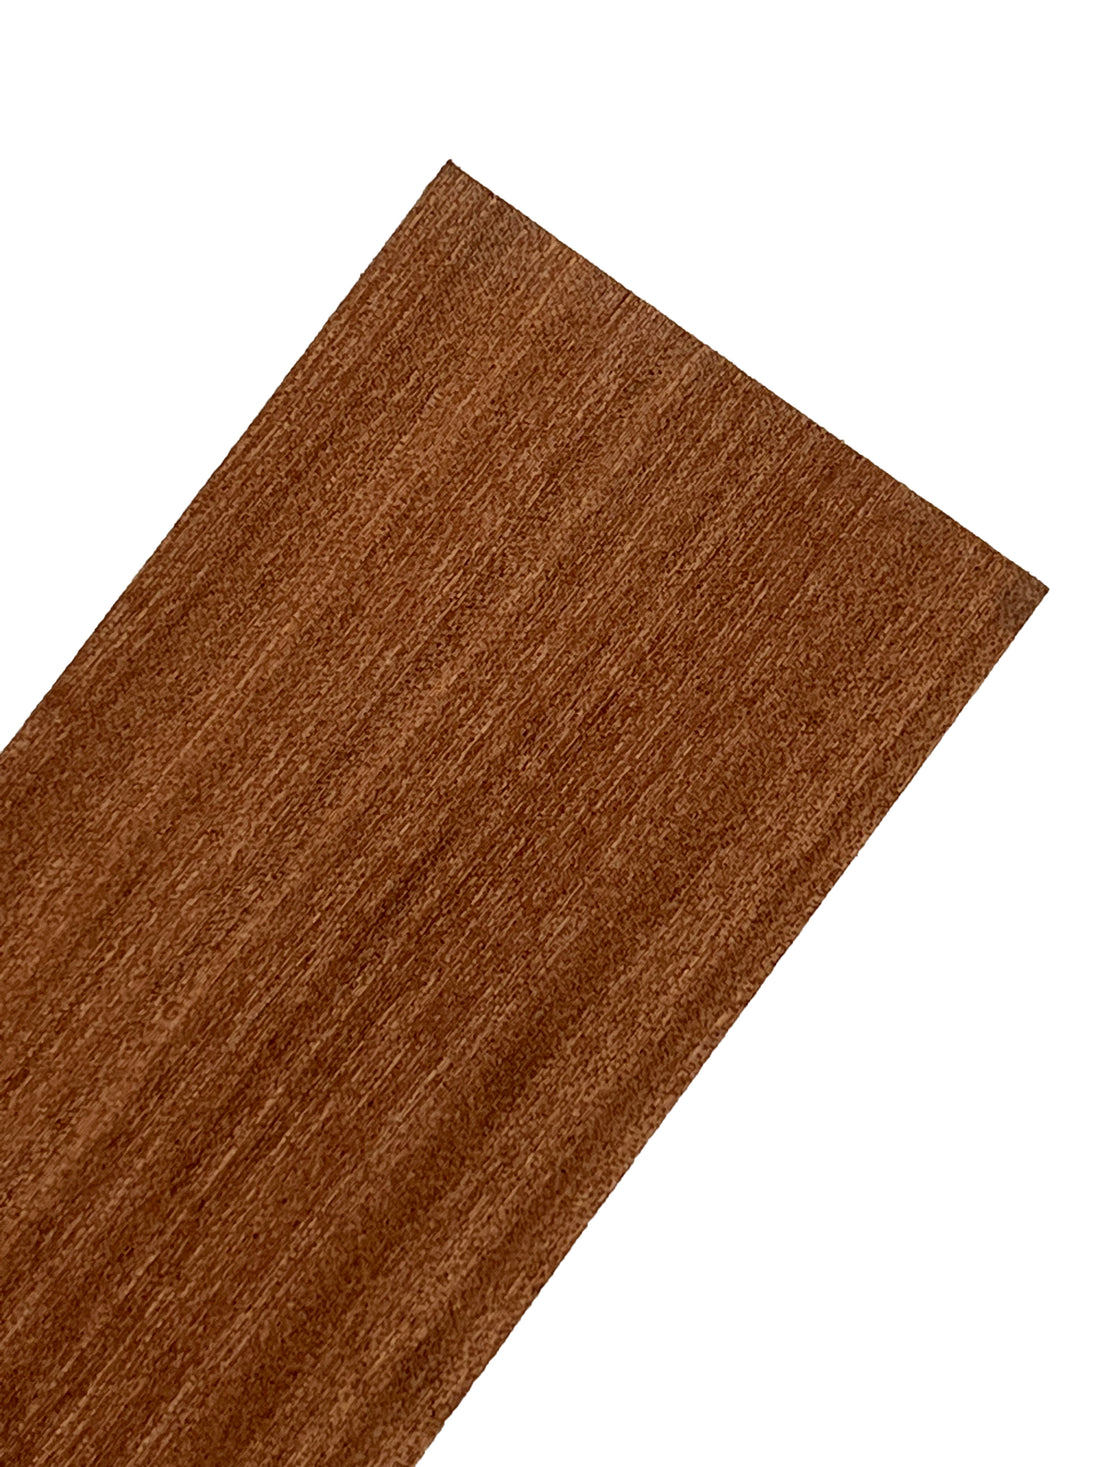 Sapele Thin Stock Lumber Boards Wood Crafts - Exotic Wood Zone - Buy online Across USA 